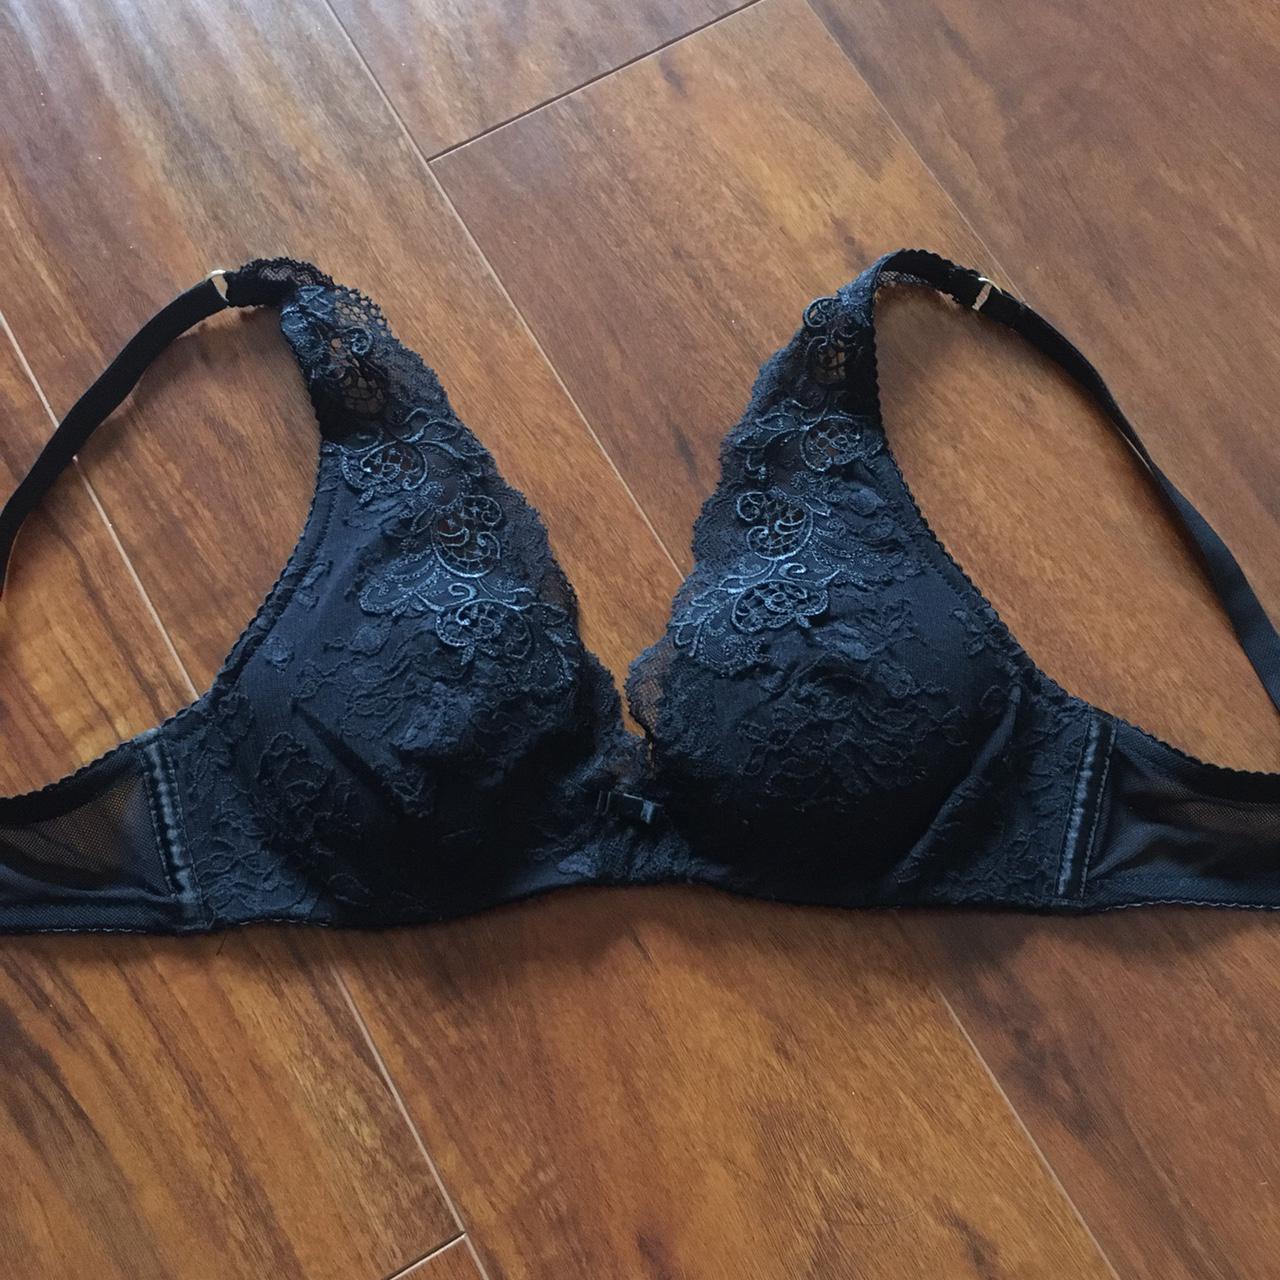 black bra with flower lace details that extend to - Depop